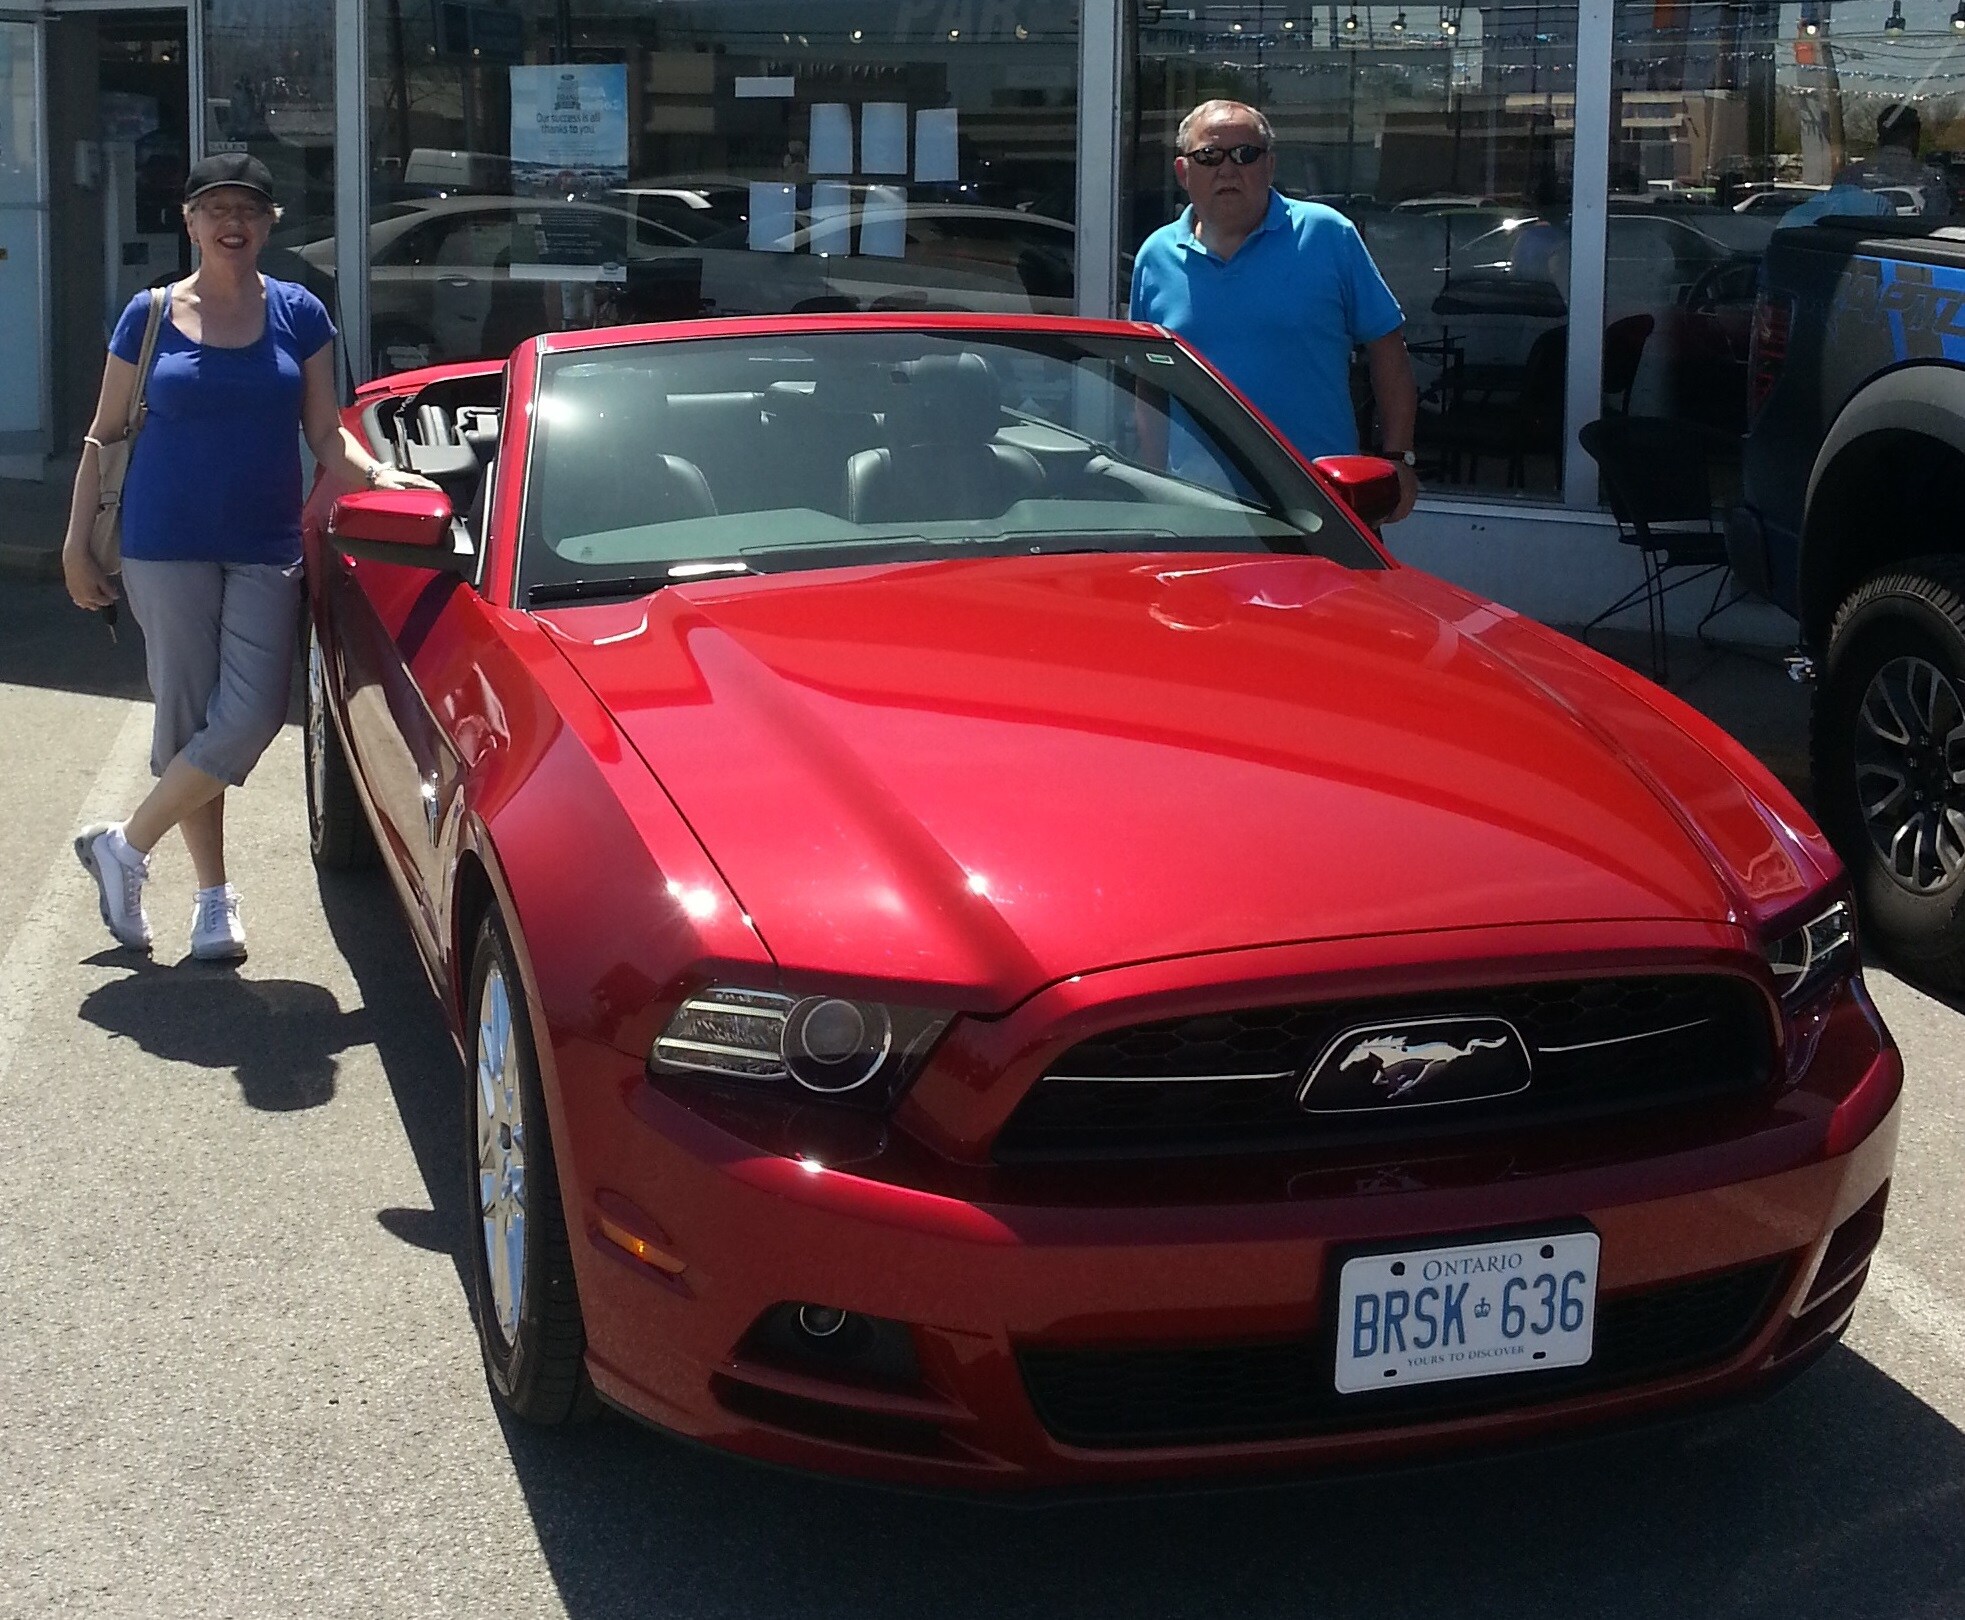 Ed learn ford lincoln st catharines #6